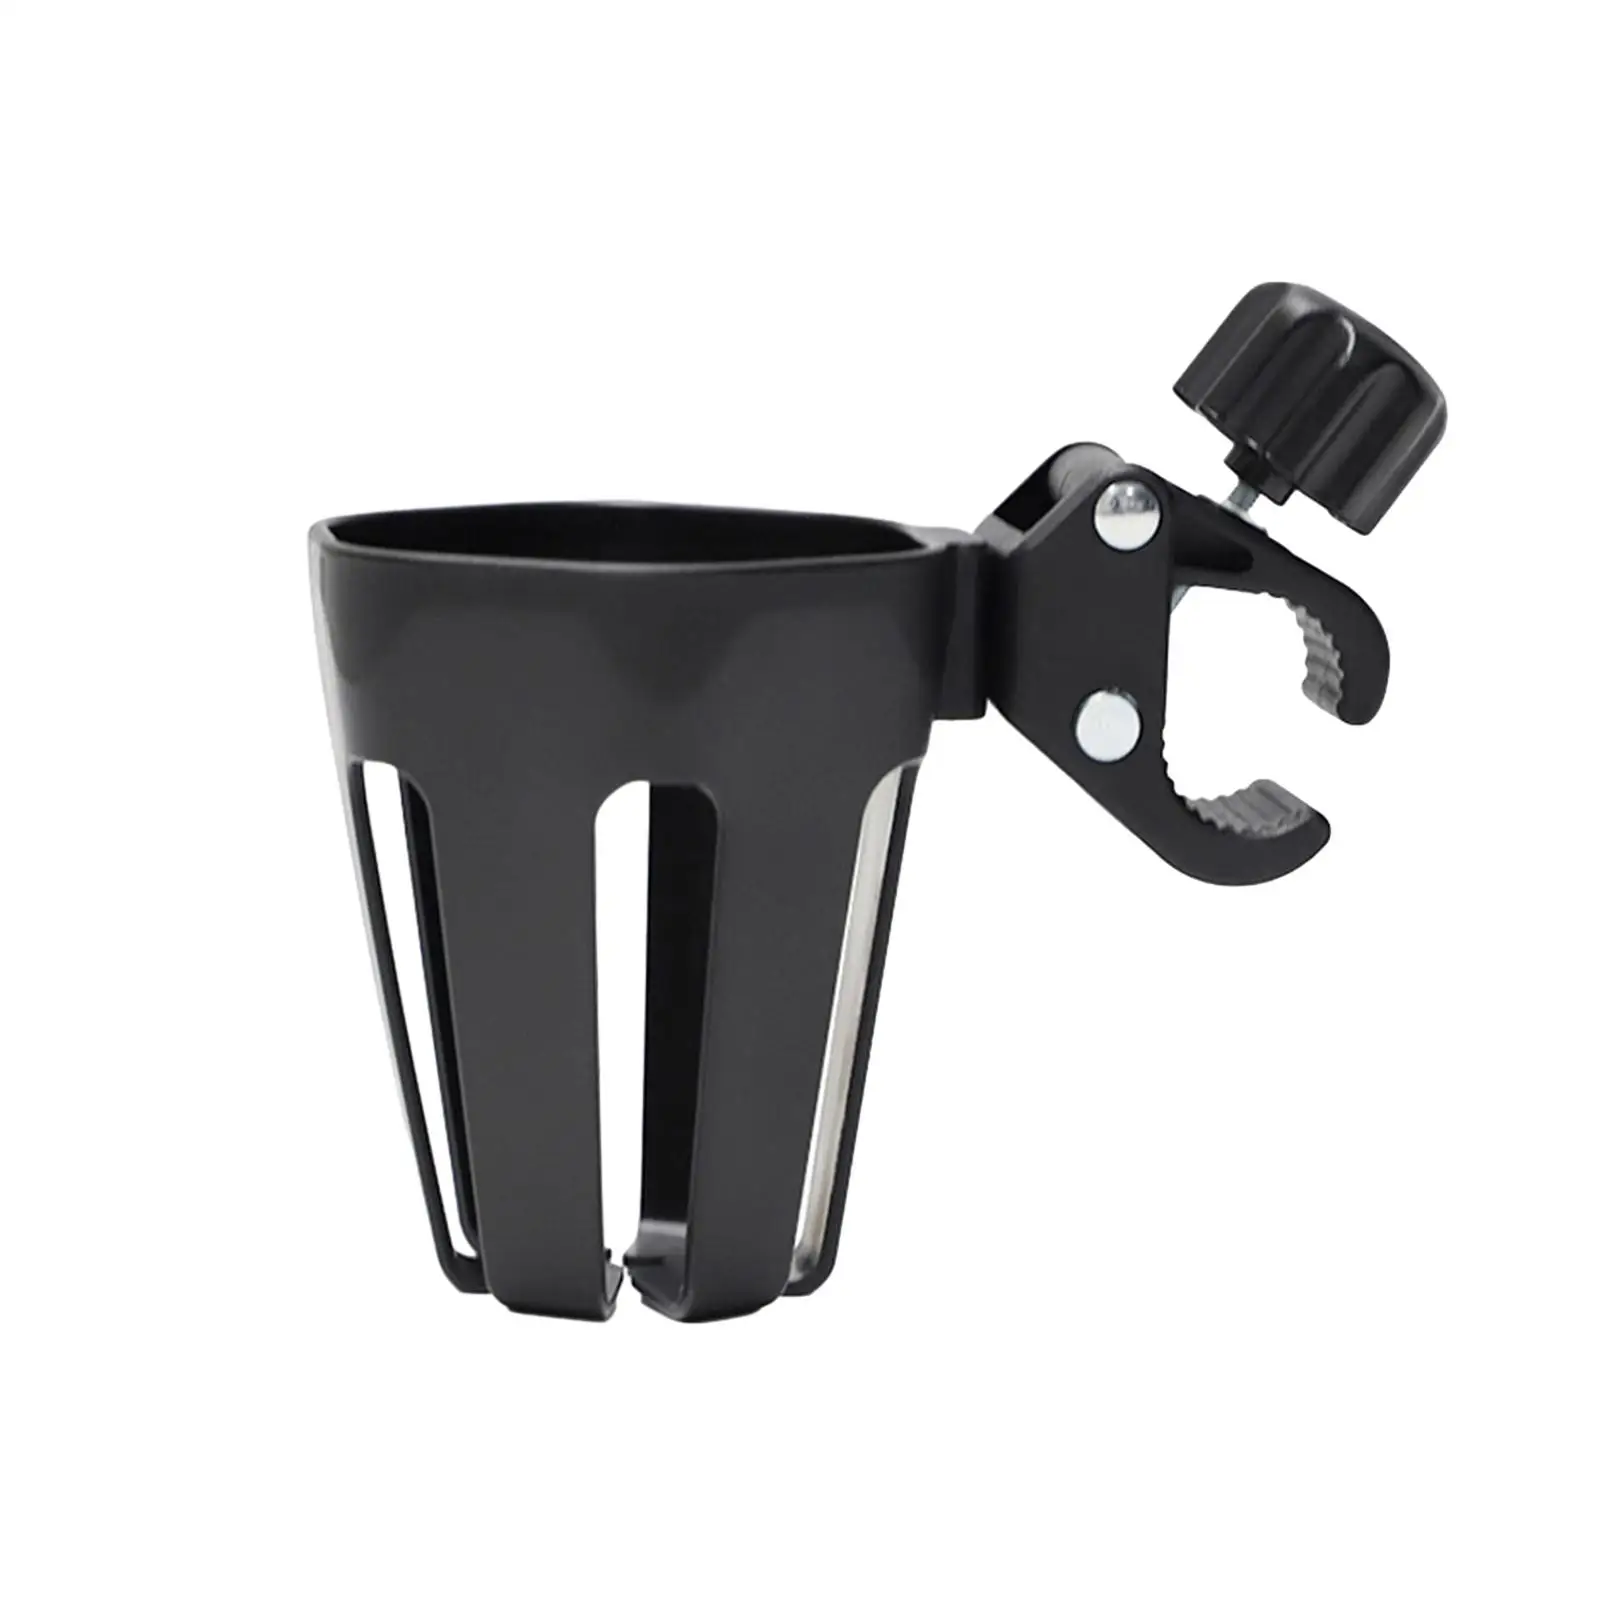 Bicycle Cup Holder Universal Drink Coffee Cup Holder for Pushchair Pram Bike